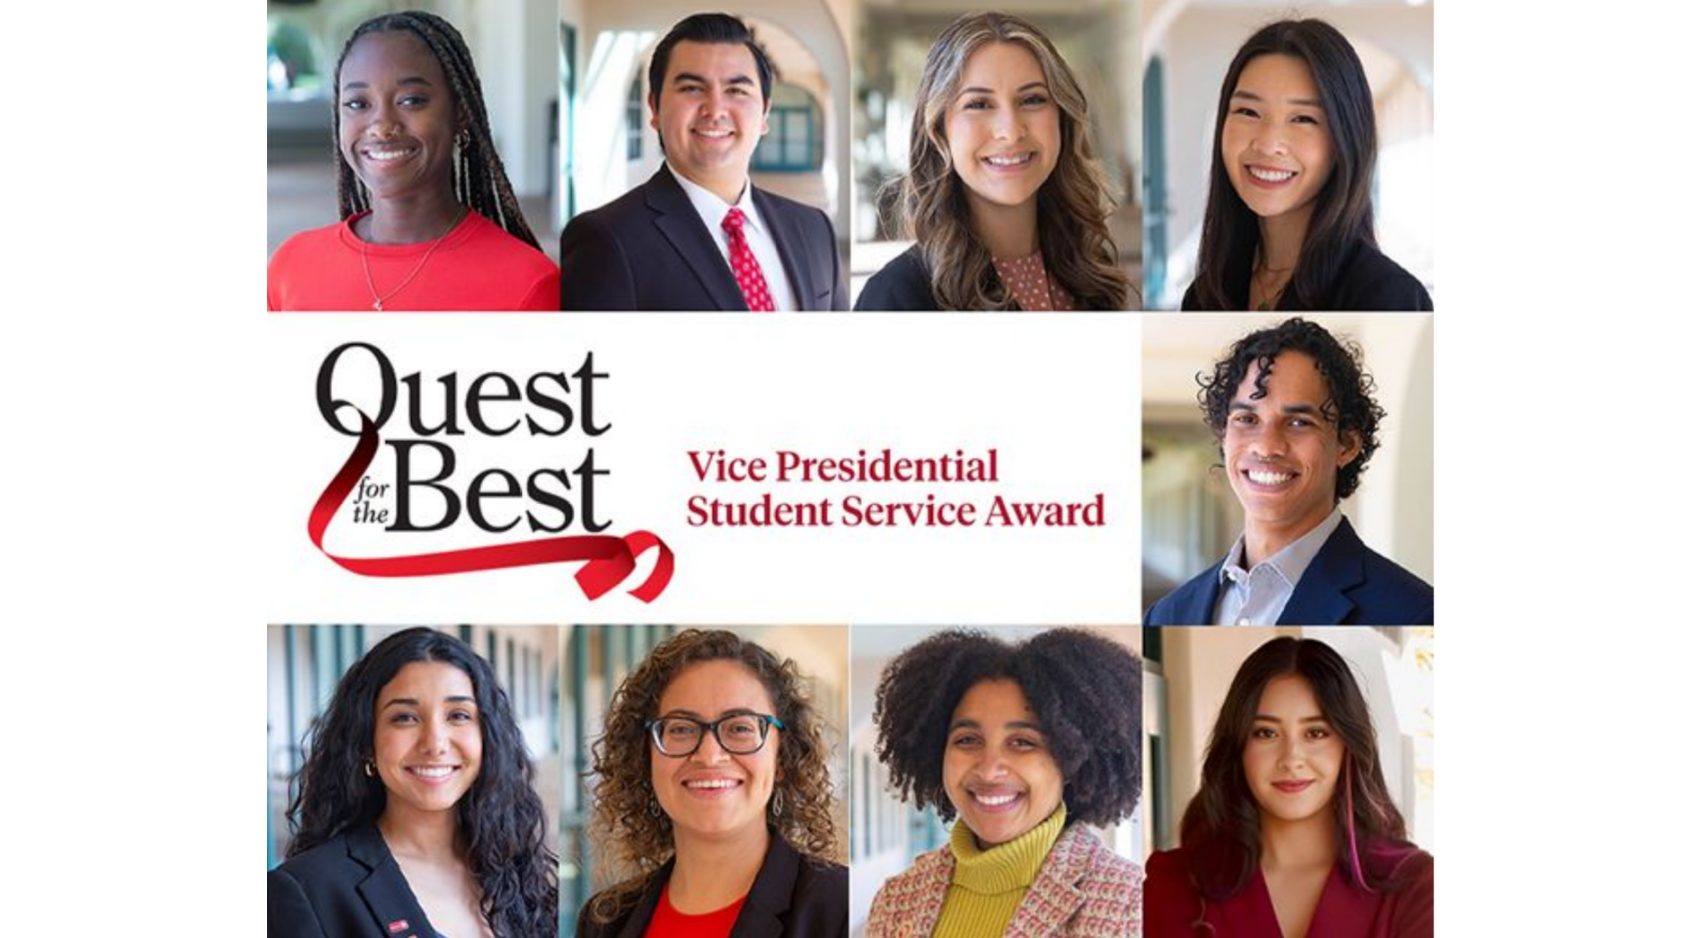 Nine SDSU students named winners of the annual Quest for the Best Award Vice Presidential Student Service Award. (SDSD)